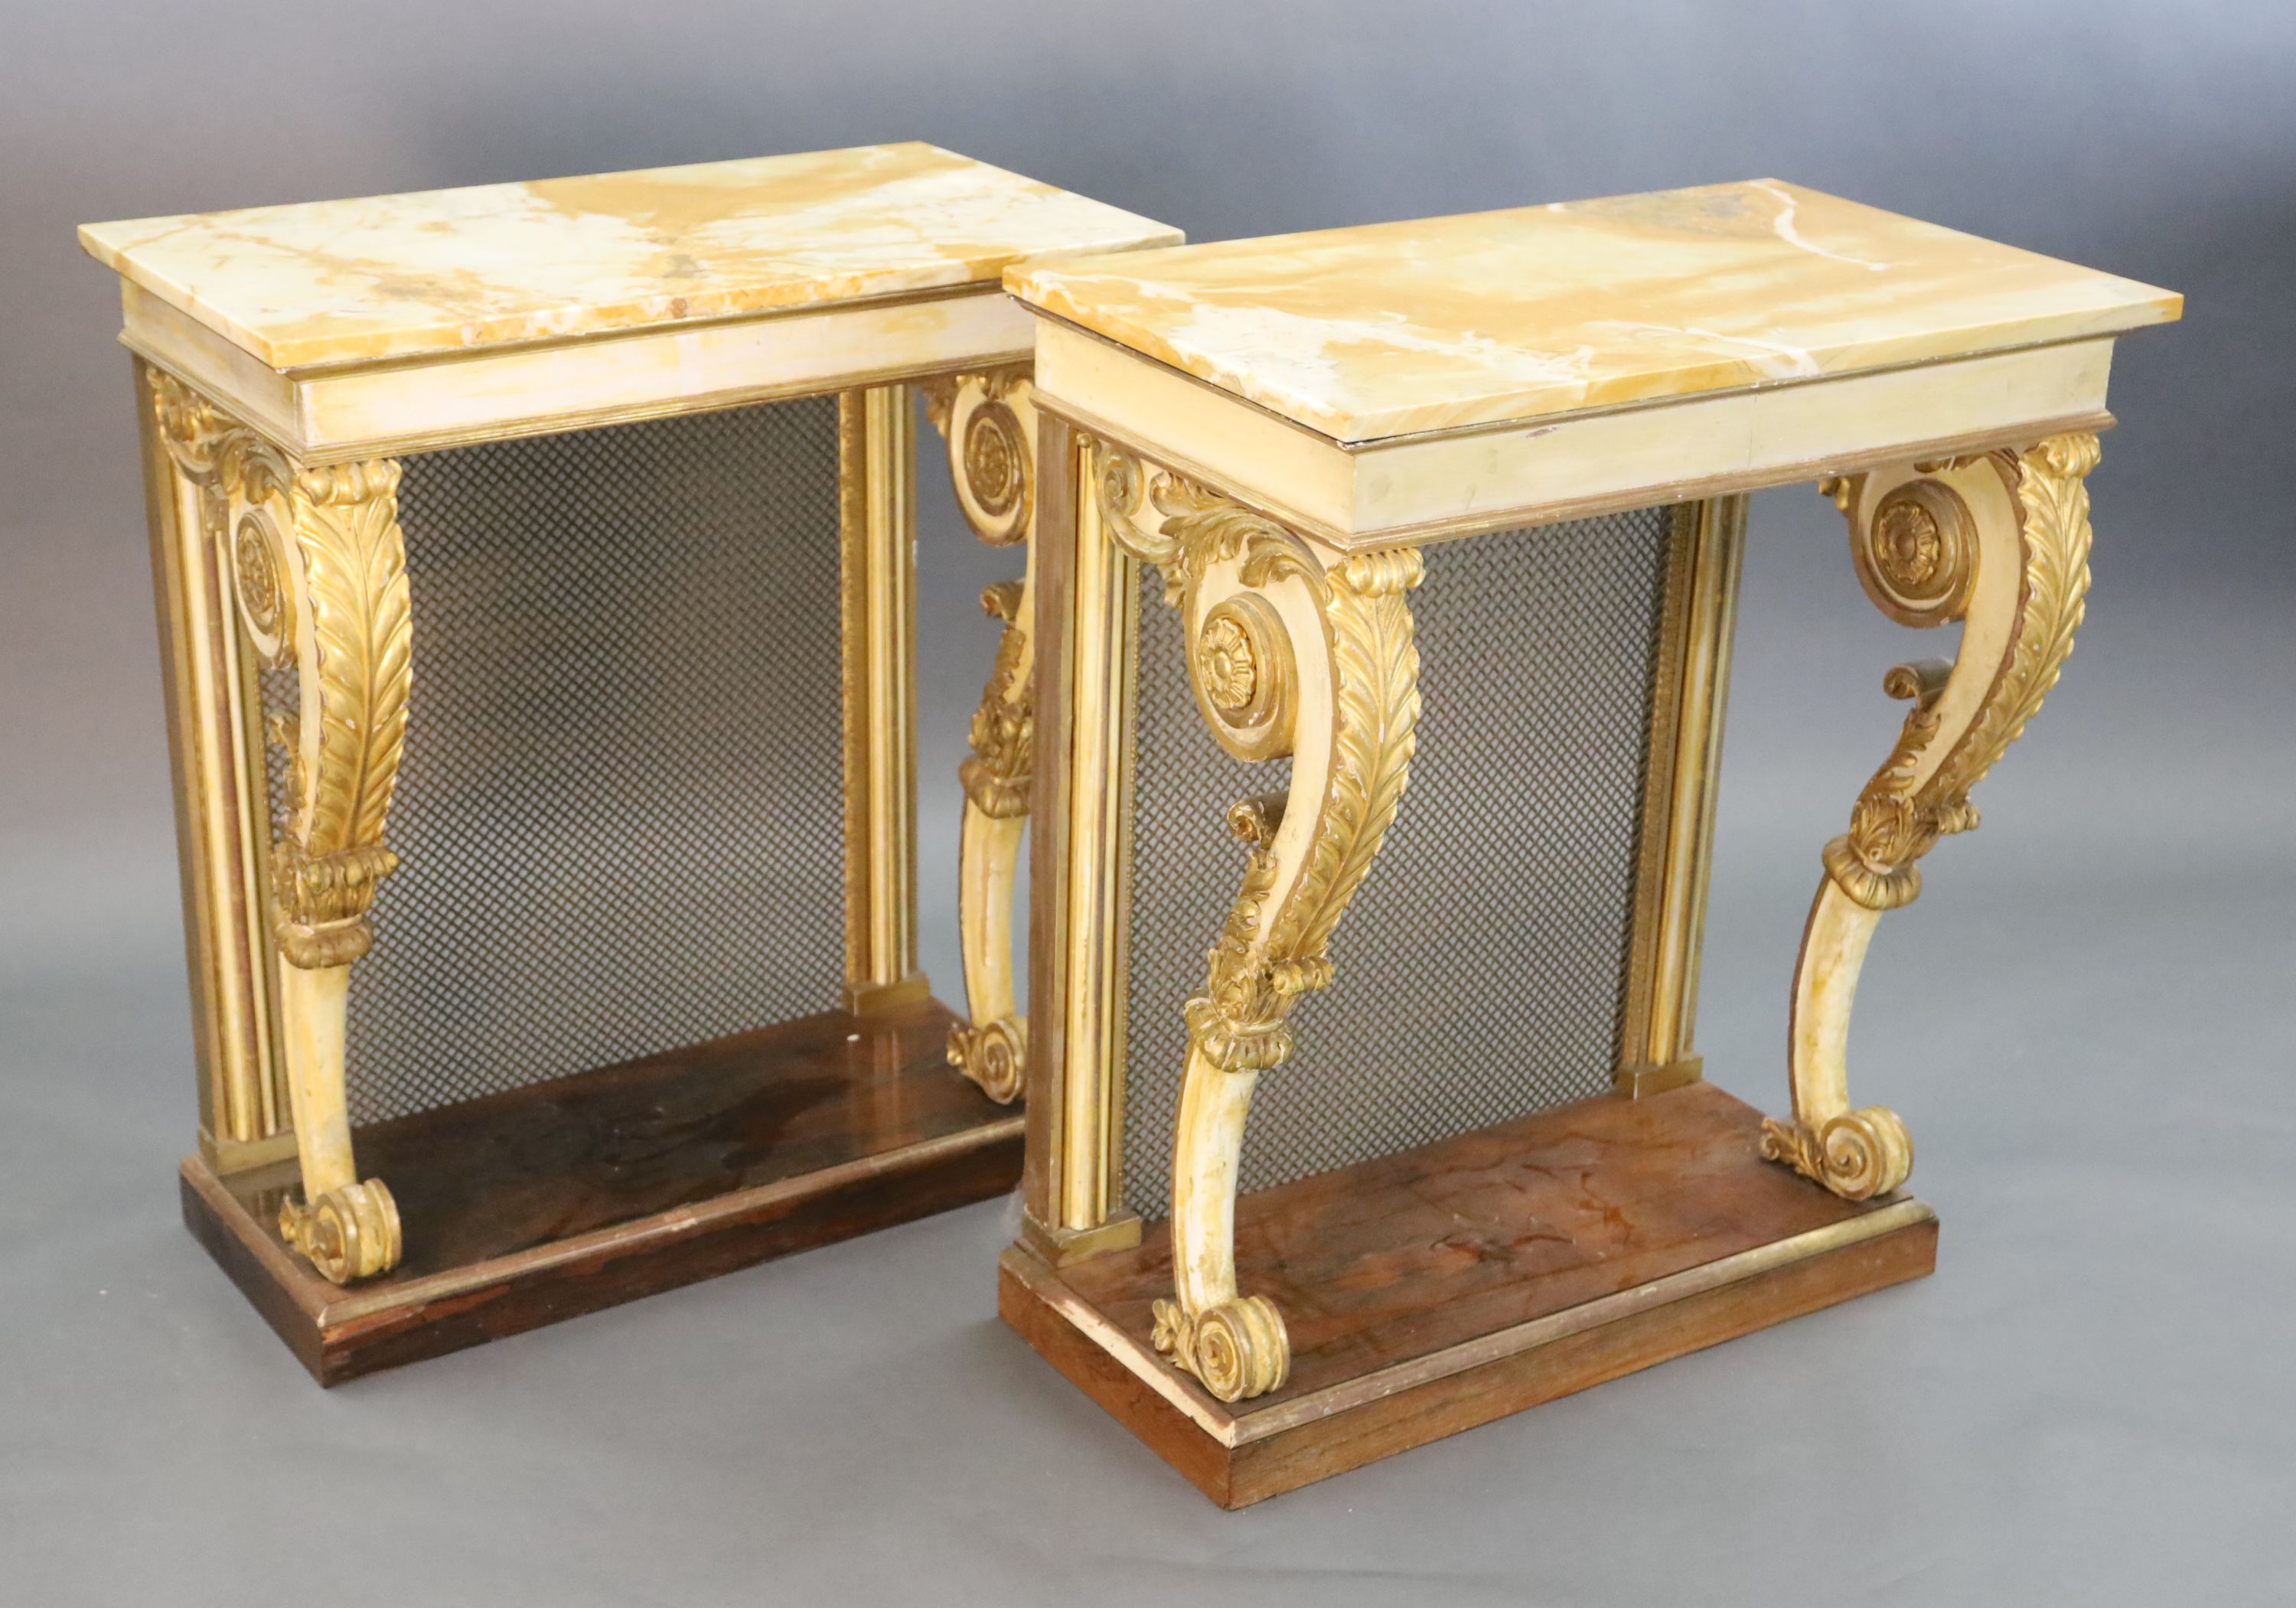 A pair of William IV parcel gilt cream painted and rosewood console tables, W.2ft 6in. D.1ft 6.5in. H.2ft 11.5in.